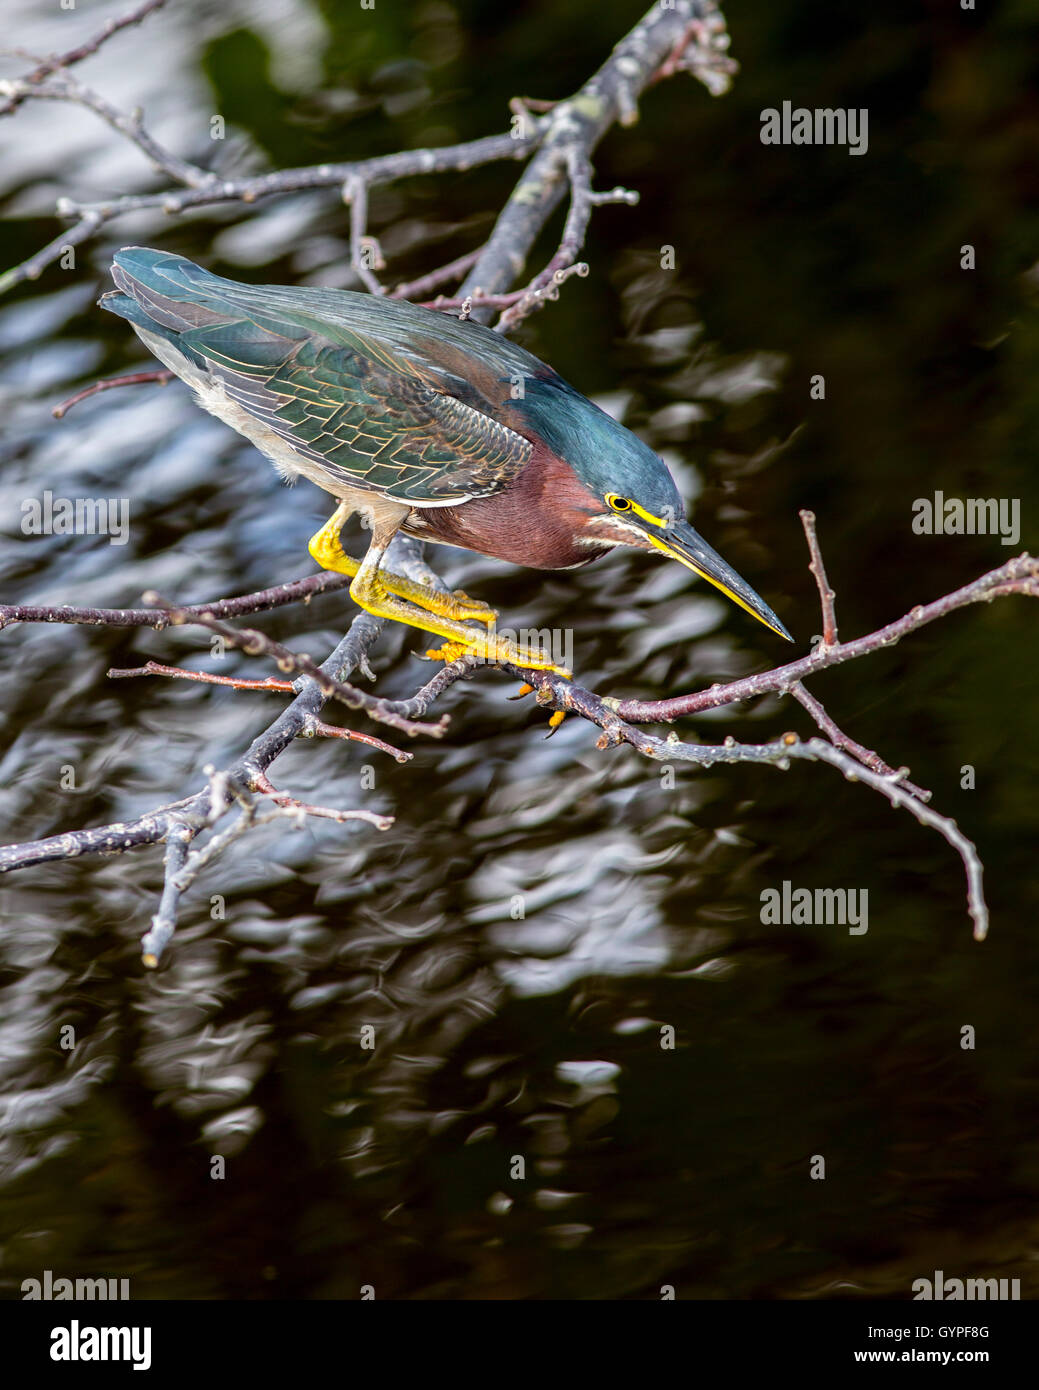 A Green Heron suspended on a branch above ripply water for fishing shows off its jewel toned feathers against the water. Stock Photo